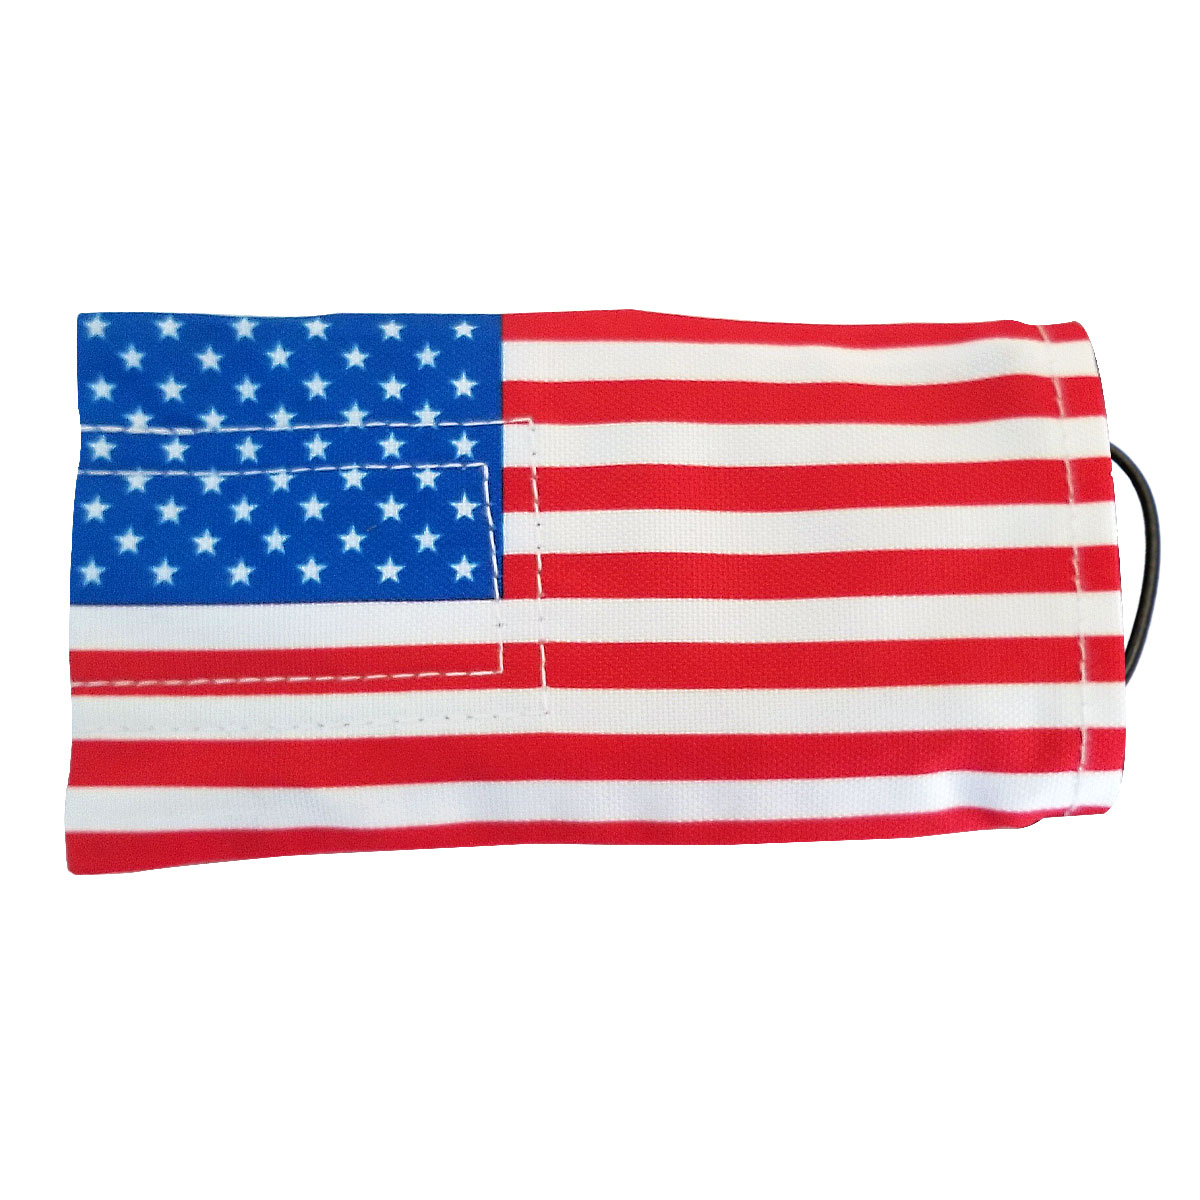 Details about   Fearless Paintball Barrel Cover White American Flag Grunge Sock Black 